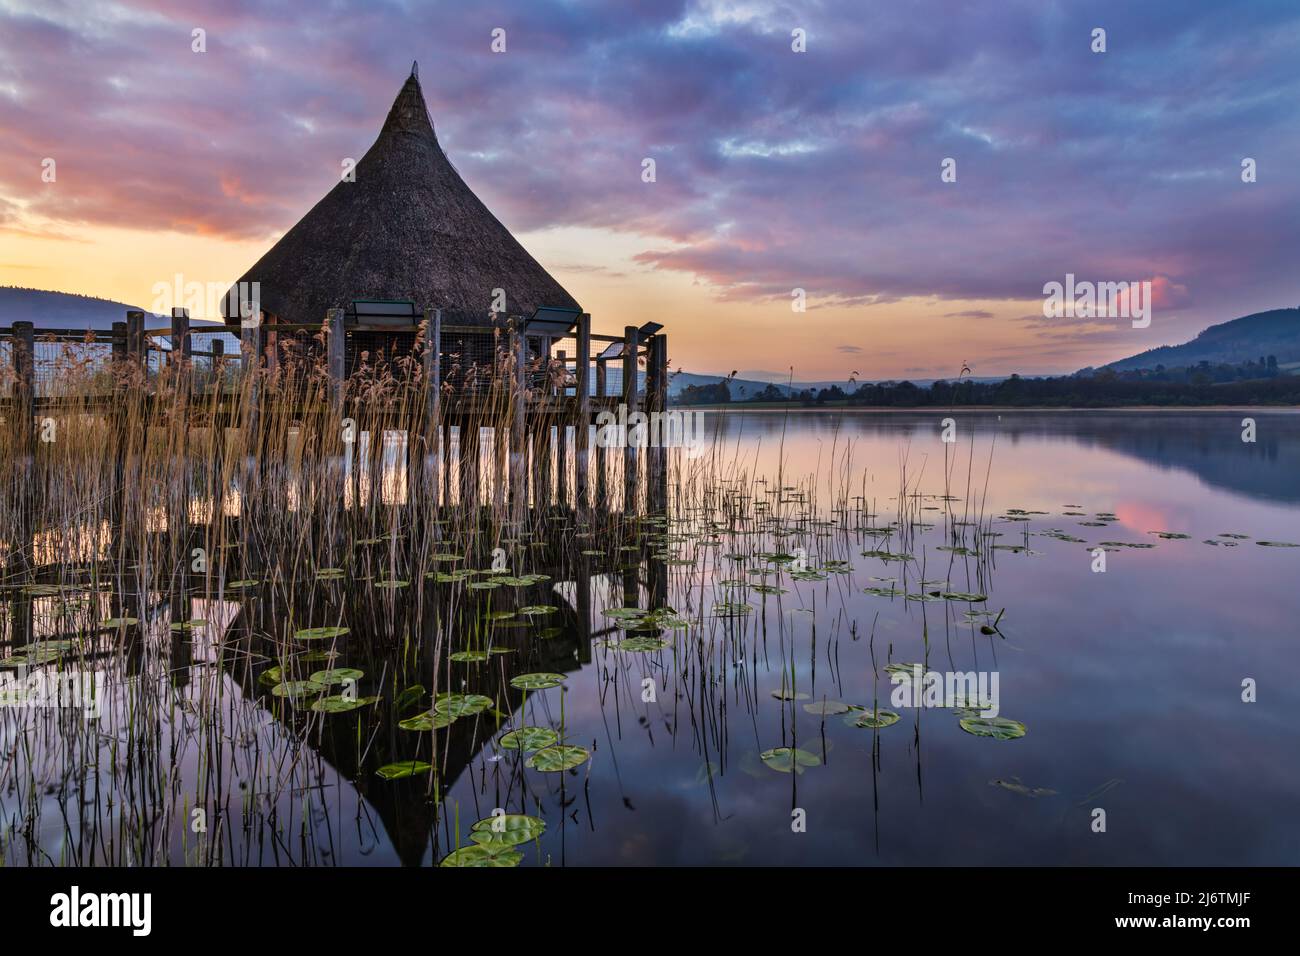 The Crannog at Llangorse Lake in the Brecon Beacons National Park, South Wales, captured at sunrise. Stock Photo